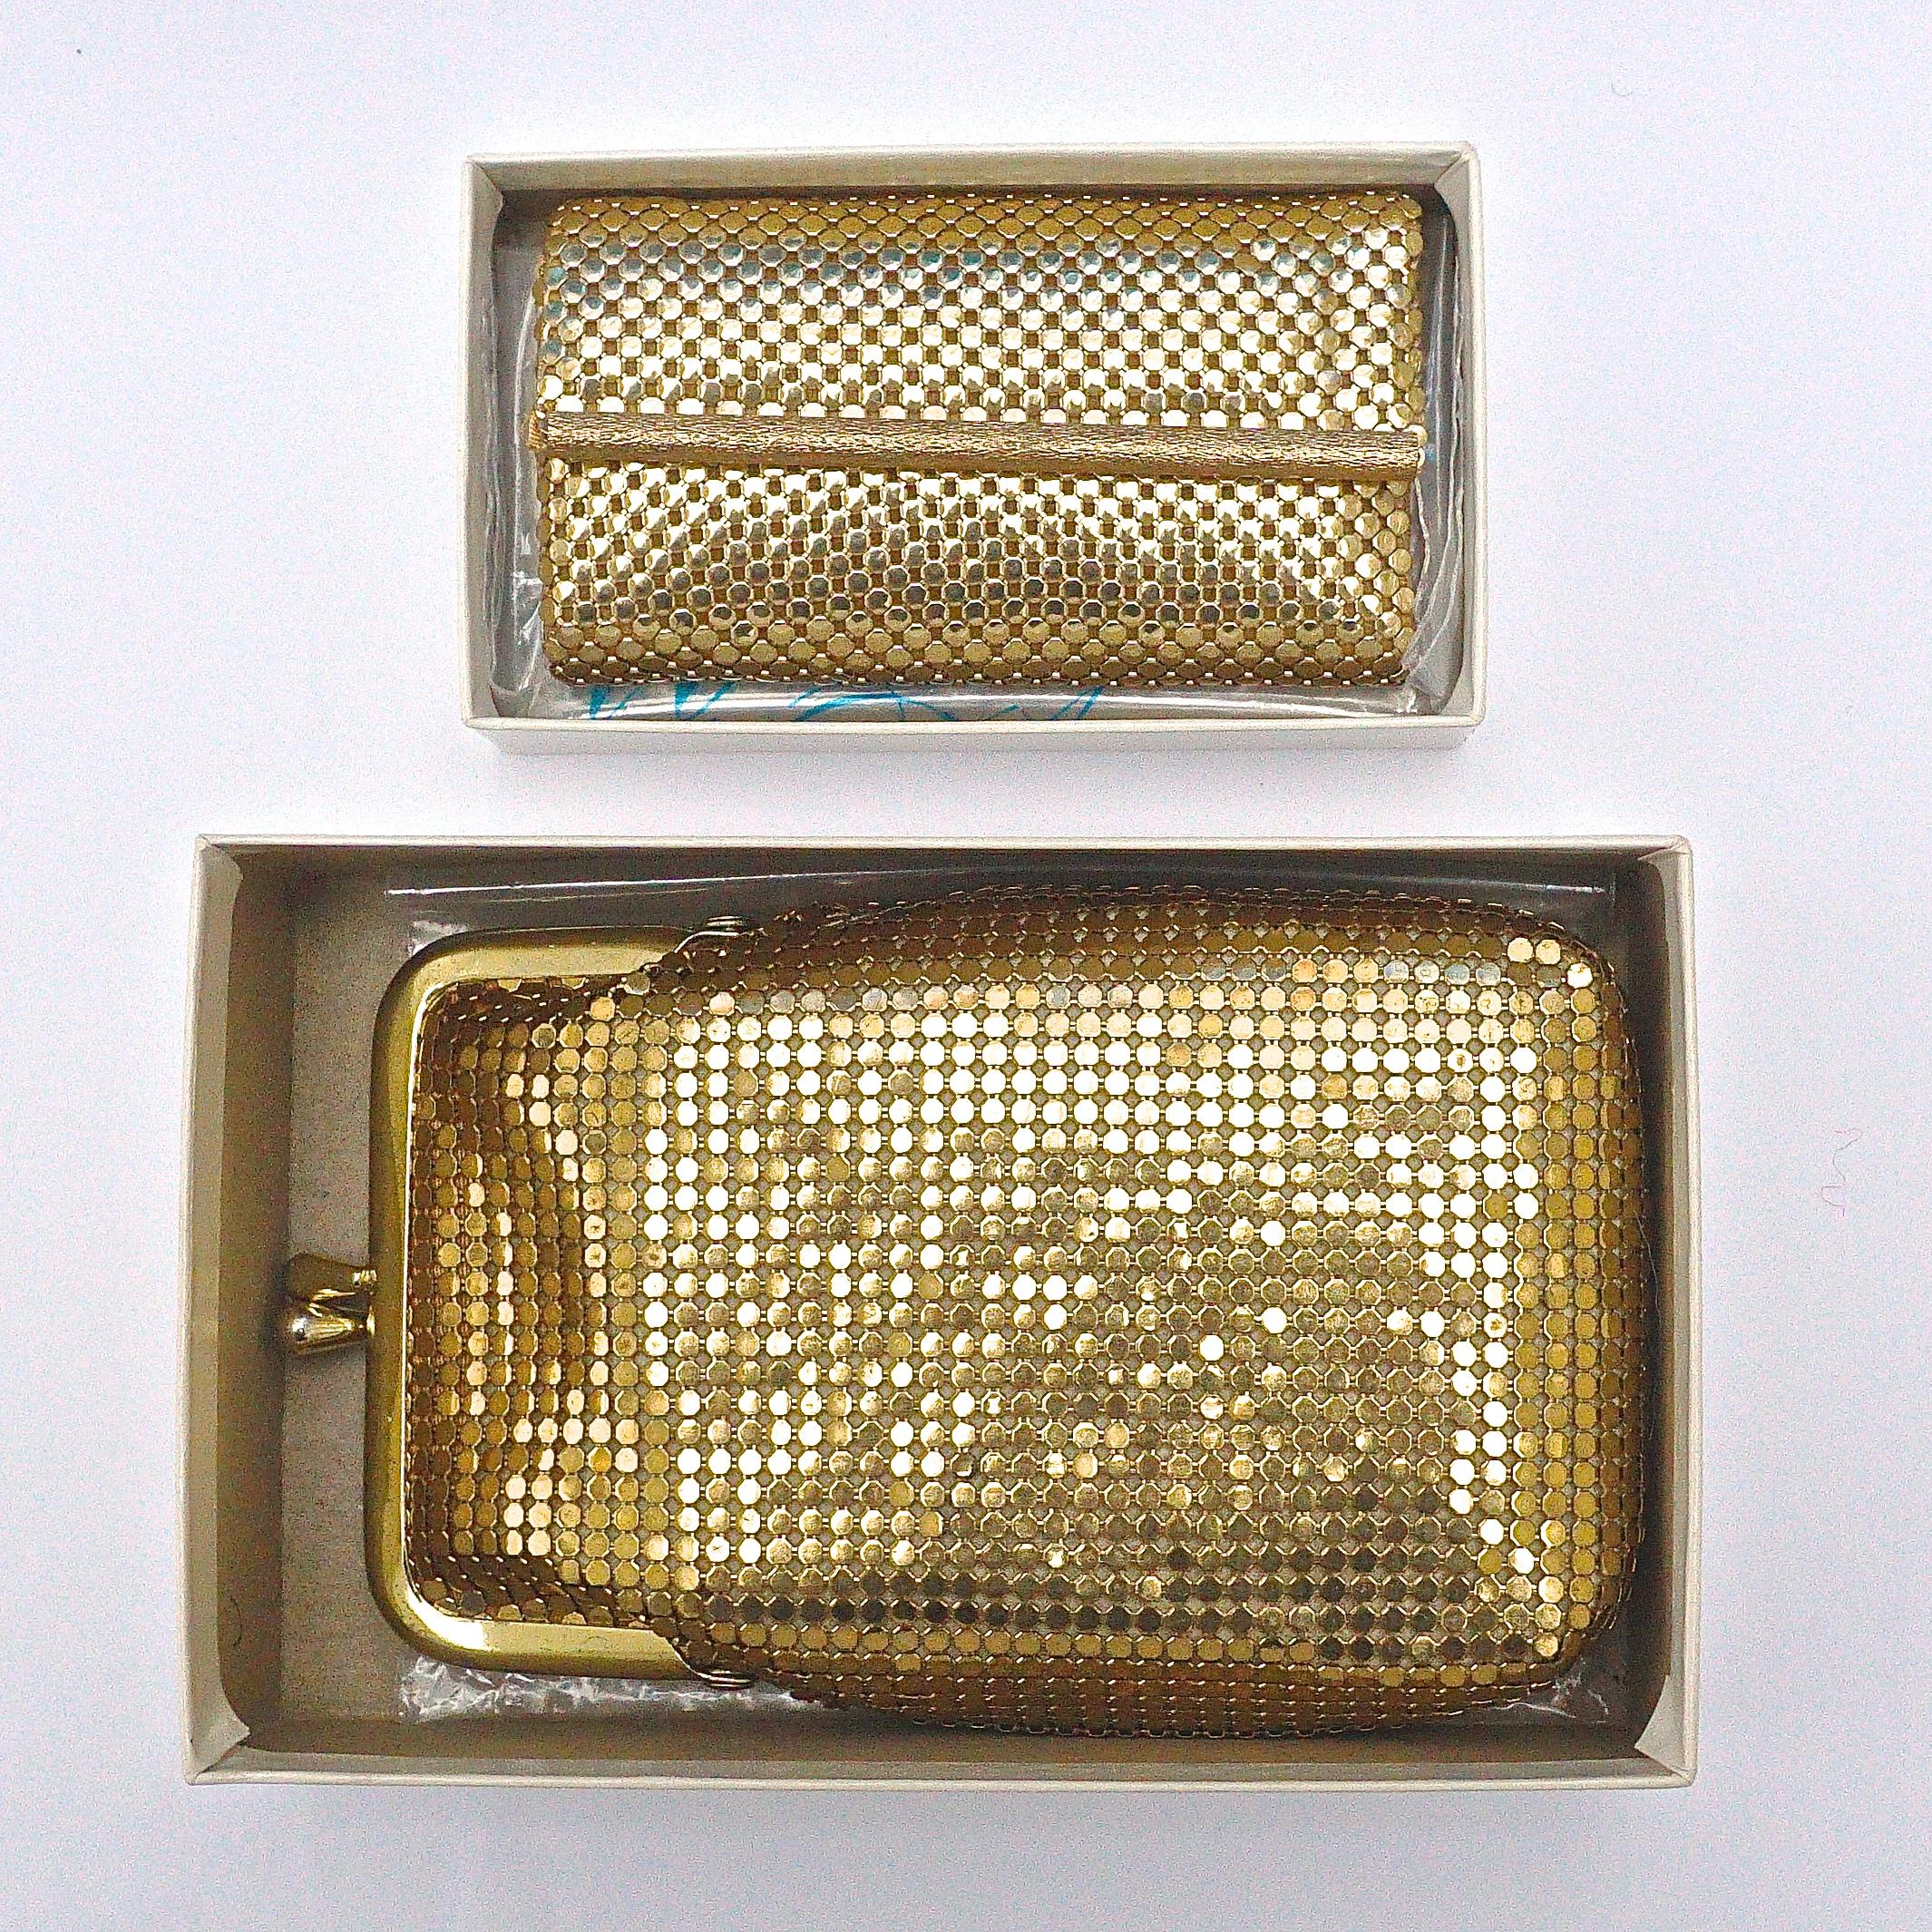 Whiting & Davis Gold Mesh Purse and Key Holder in Original Boxes 2